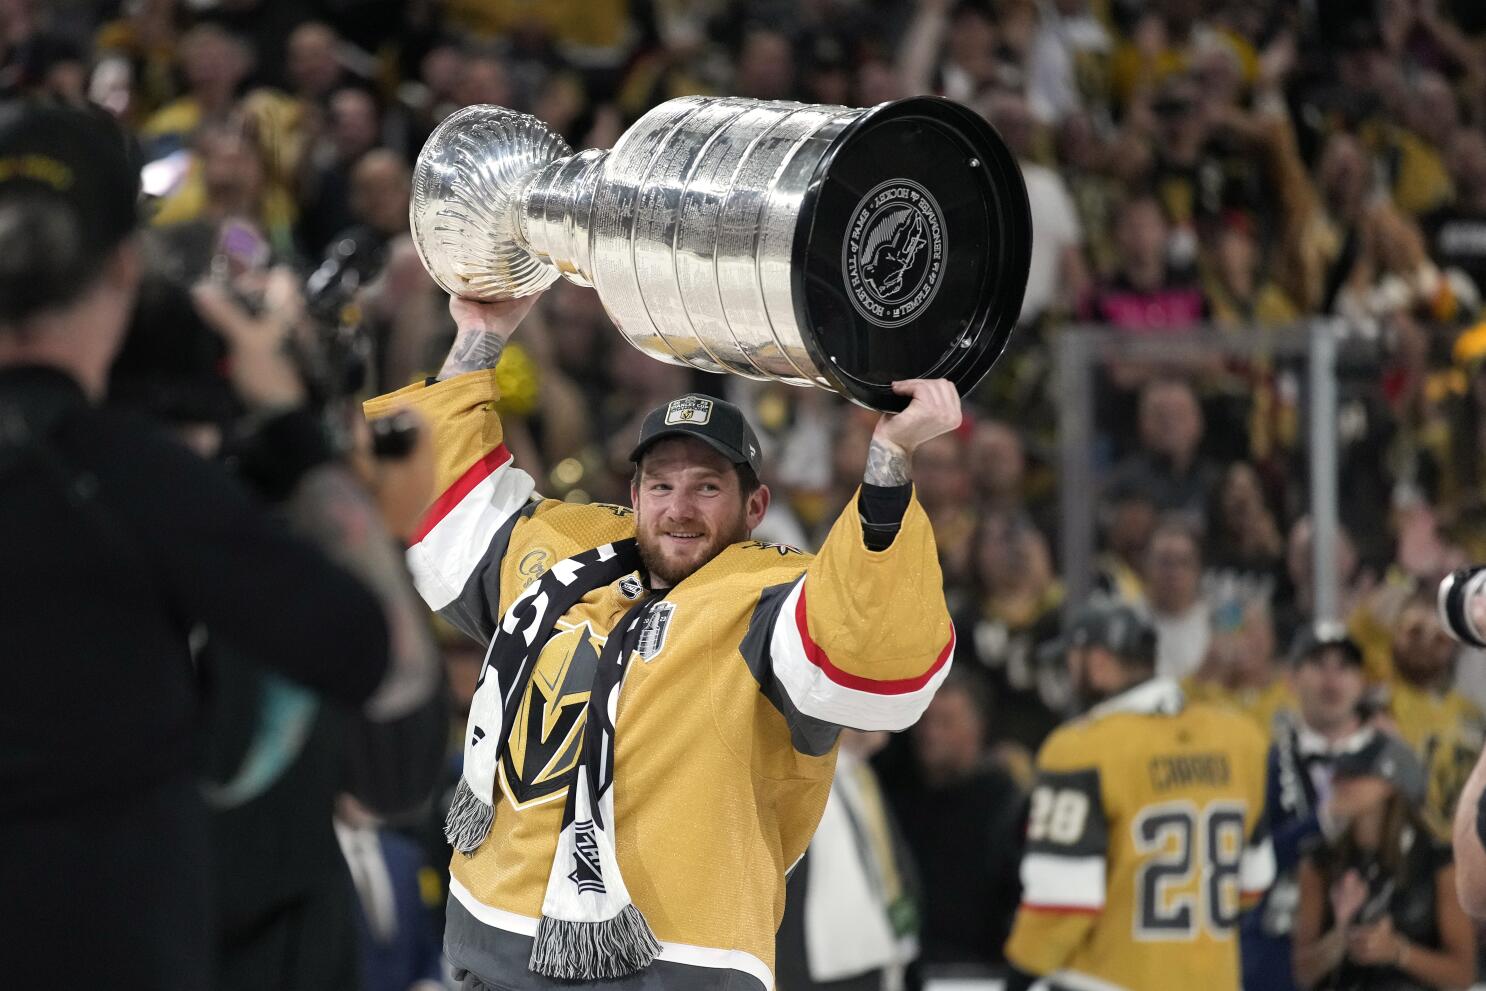 Stanley LV Cup